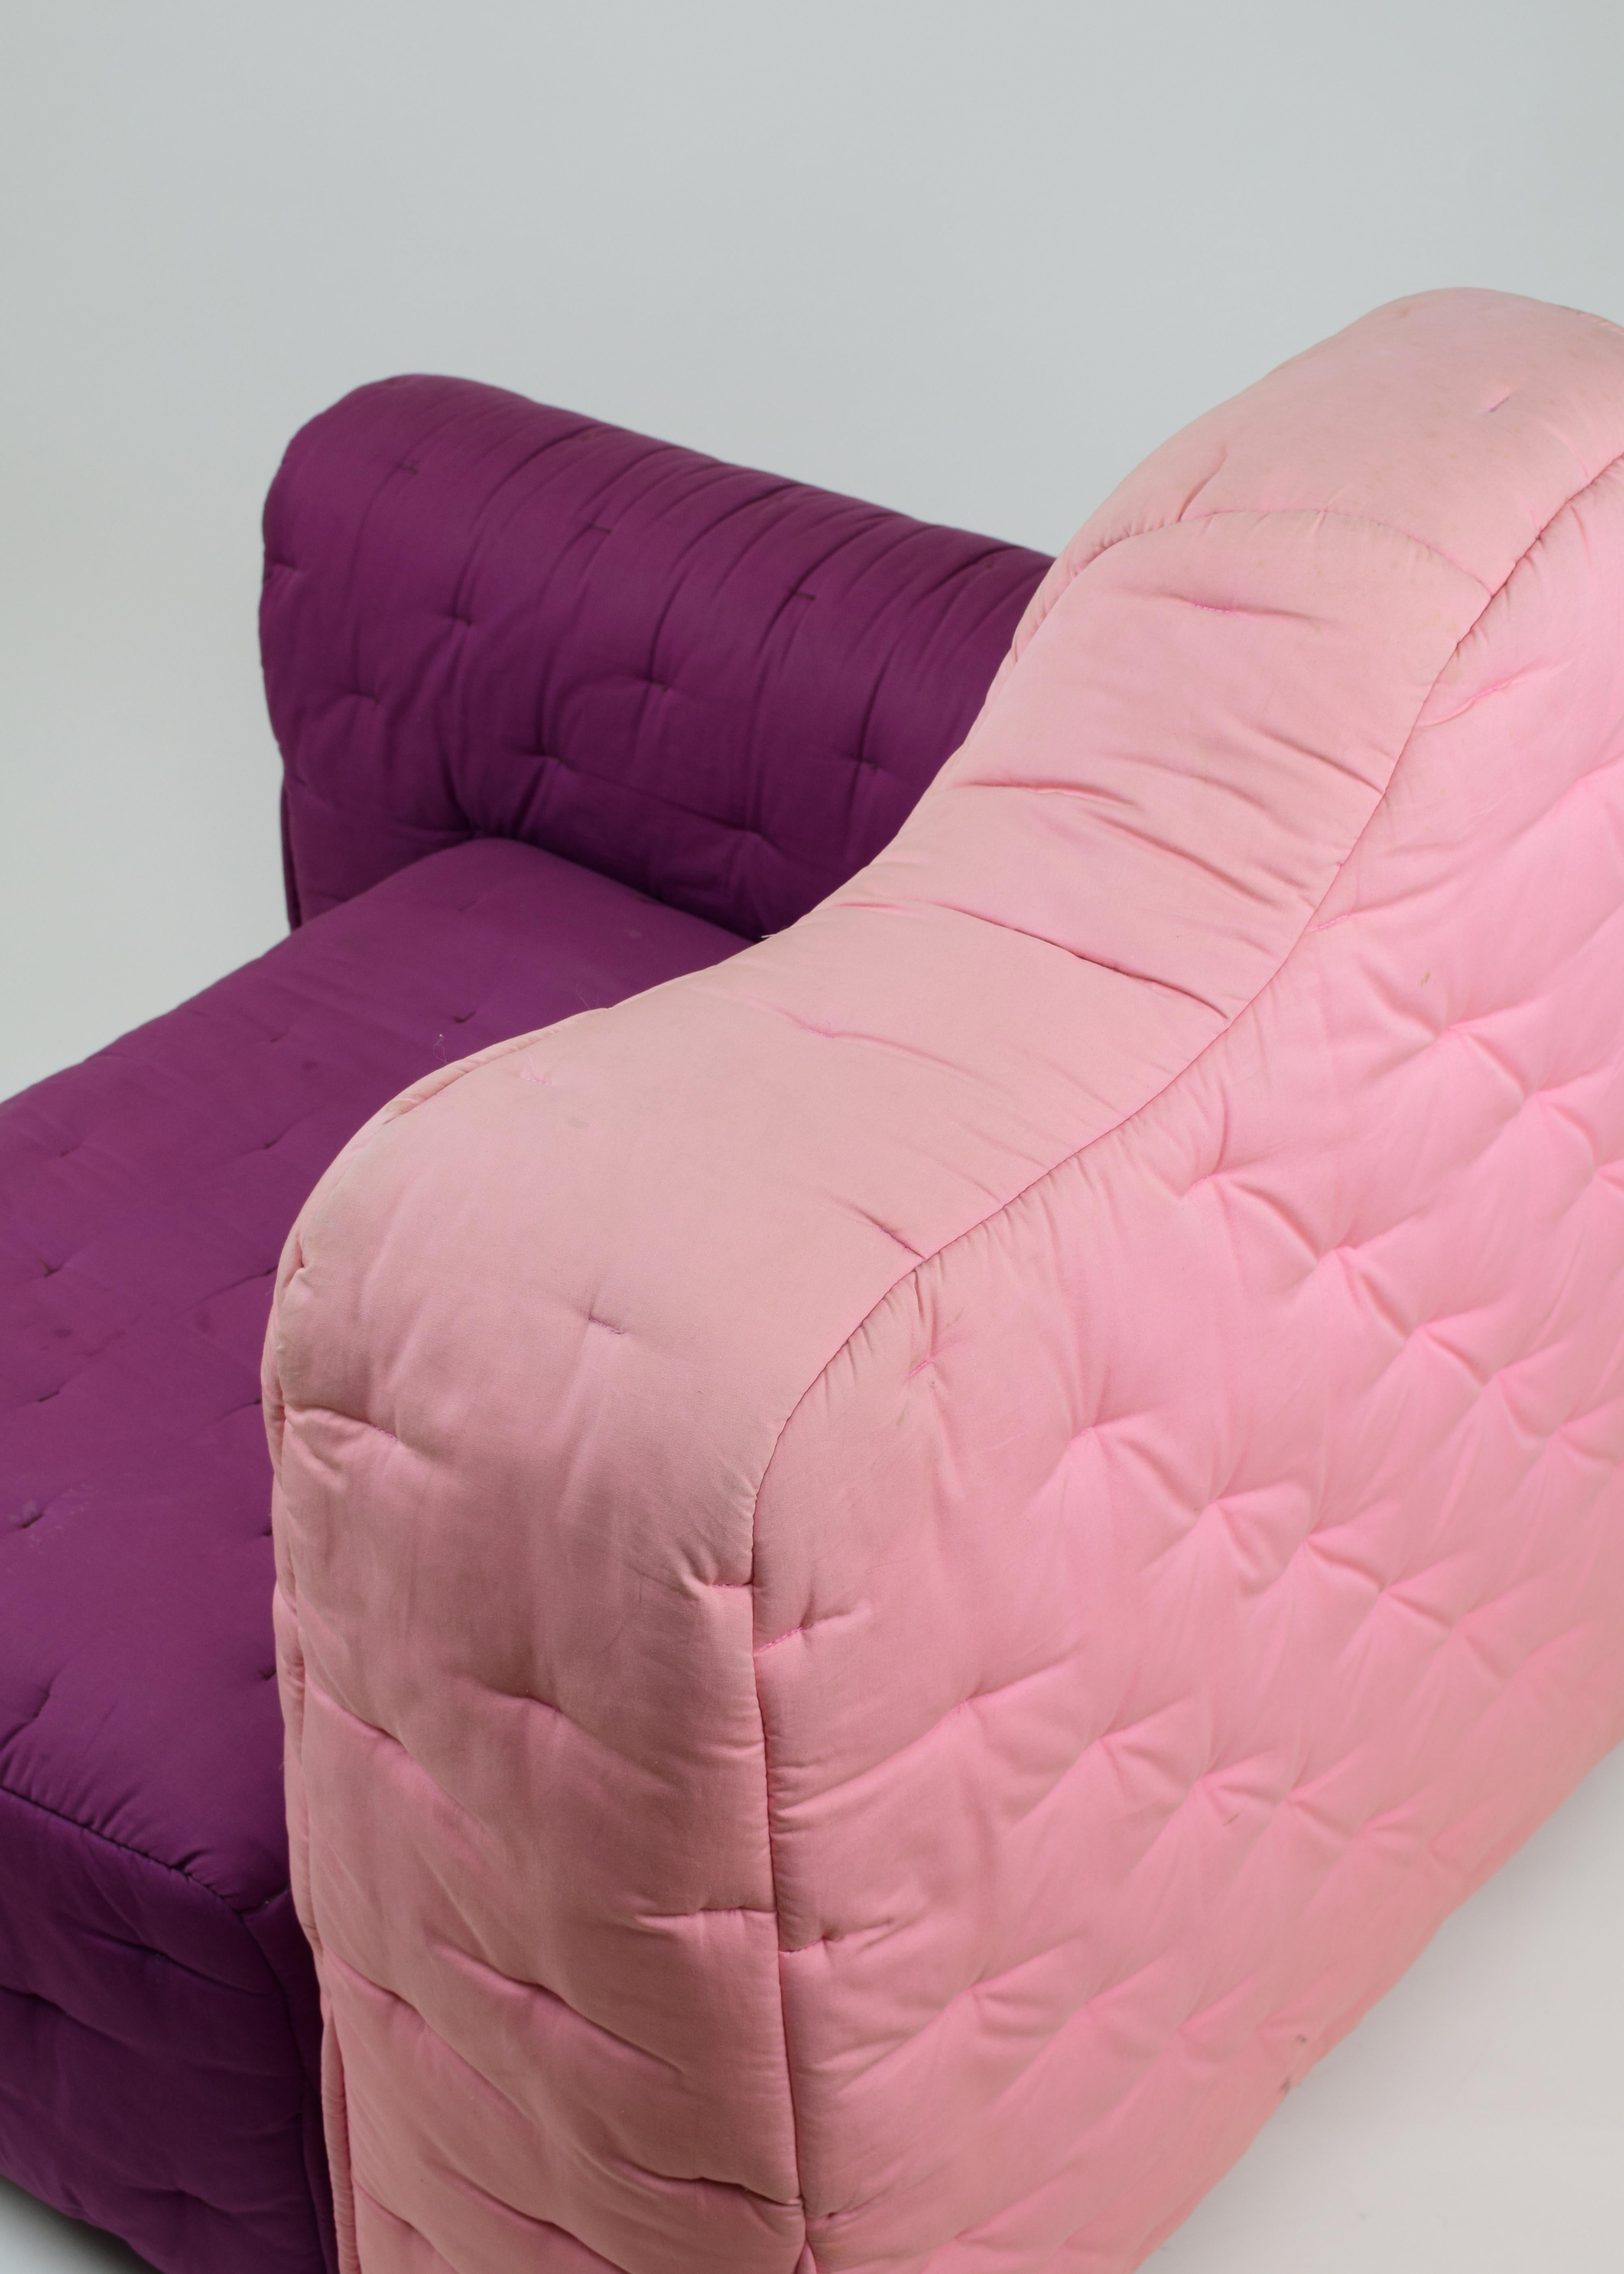 Gaetano Pesce, 'Cannaregio' Armchair, Cassina Italy 1987, Large Pink and Purple For Sale 10